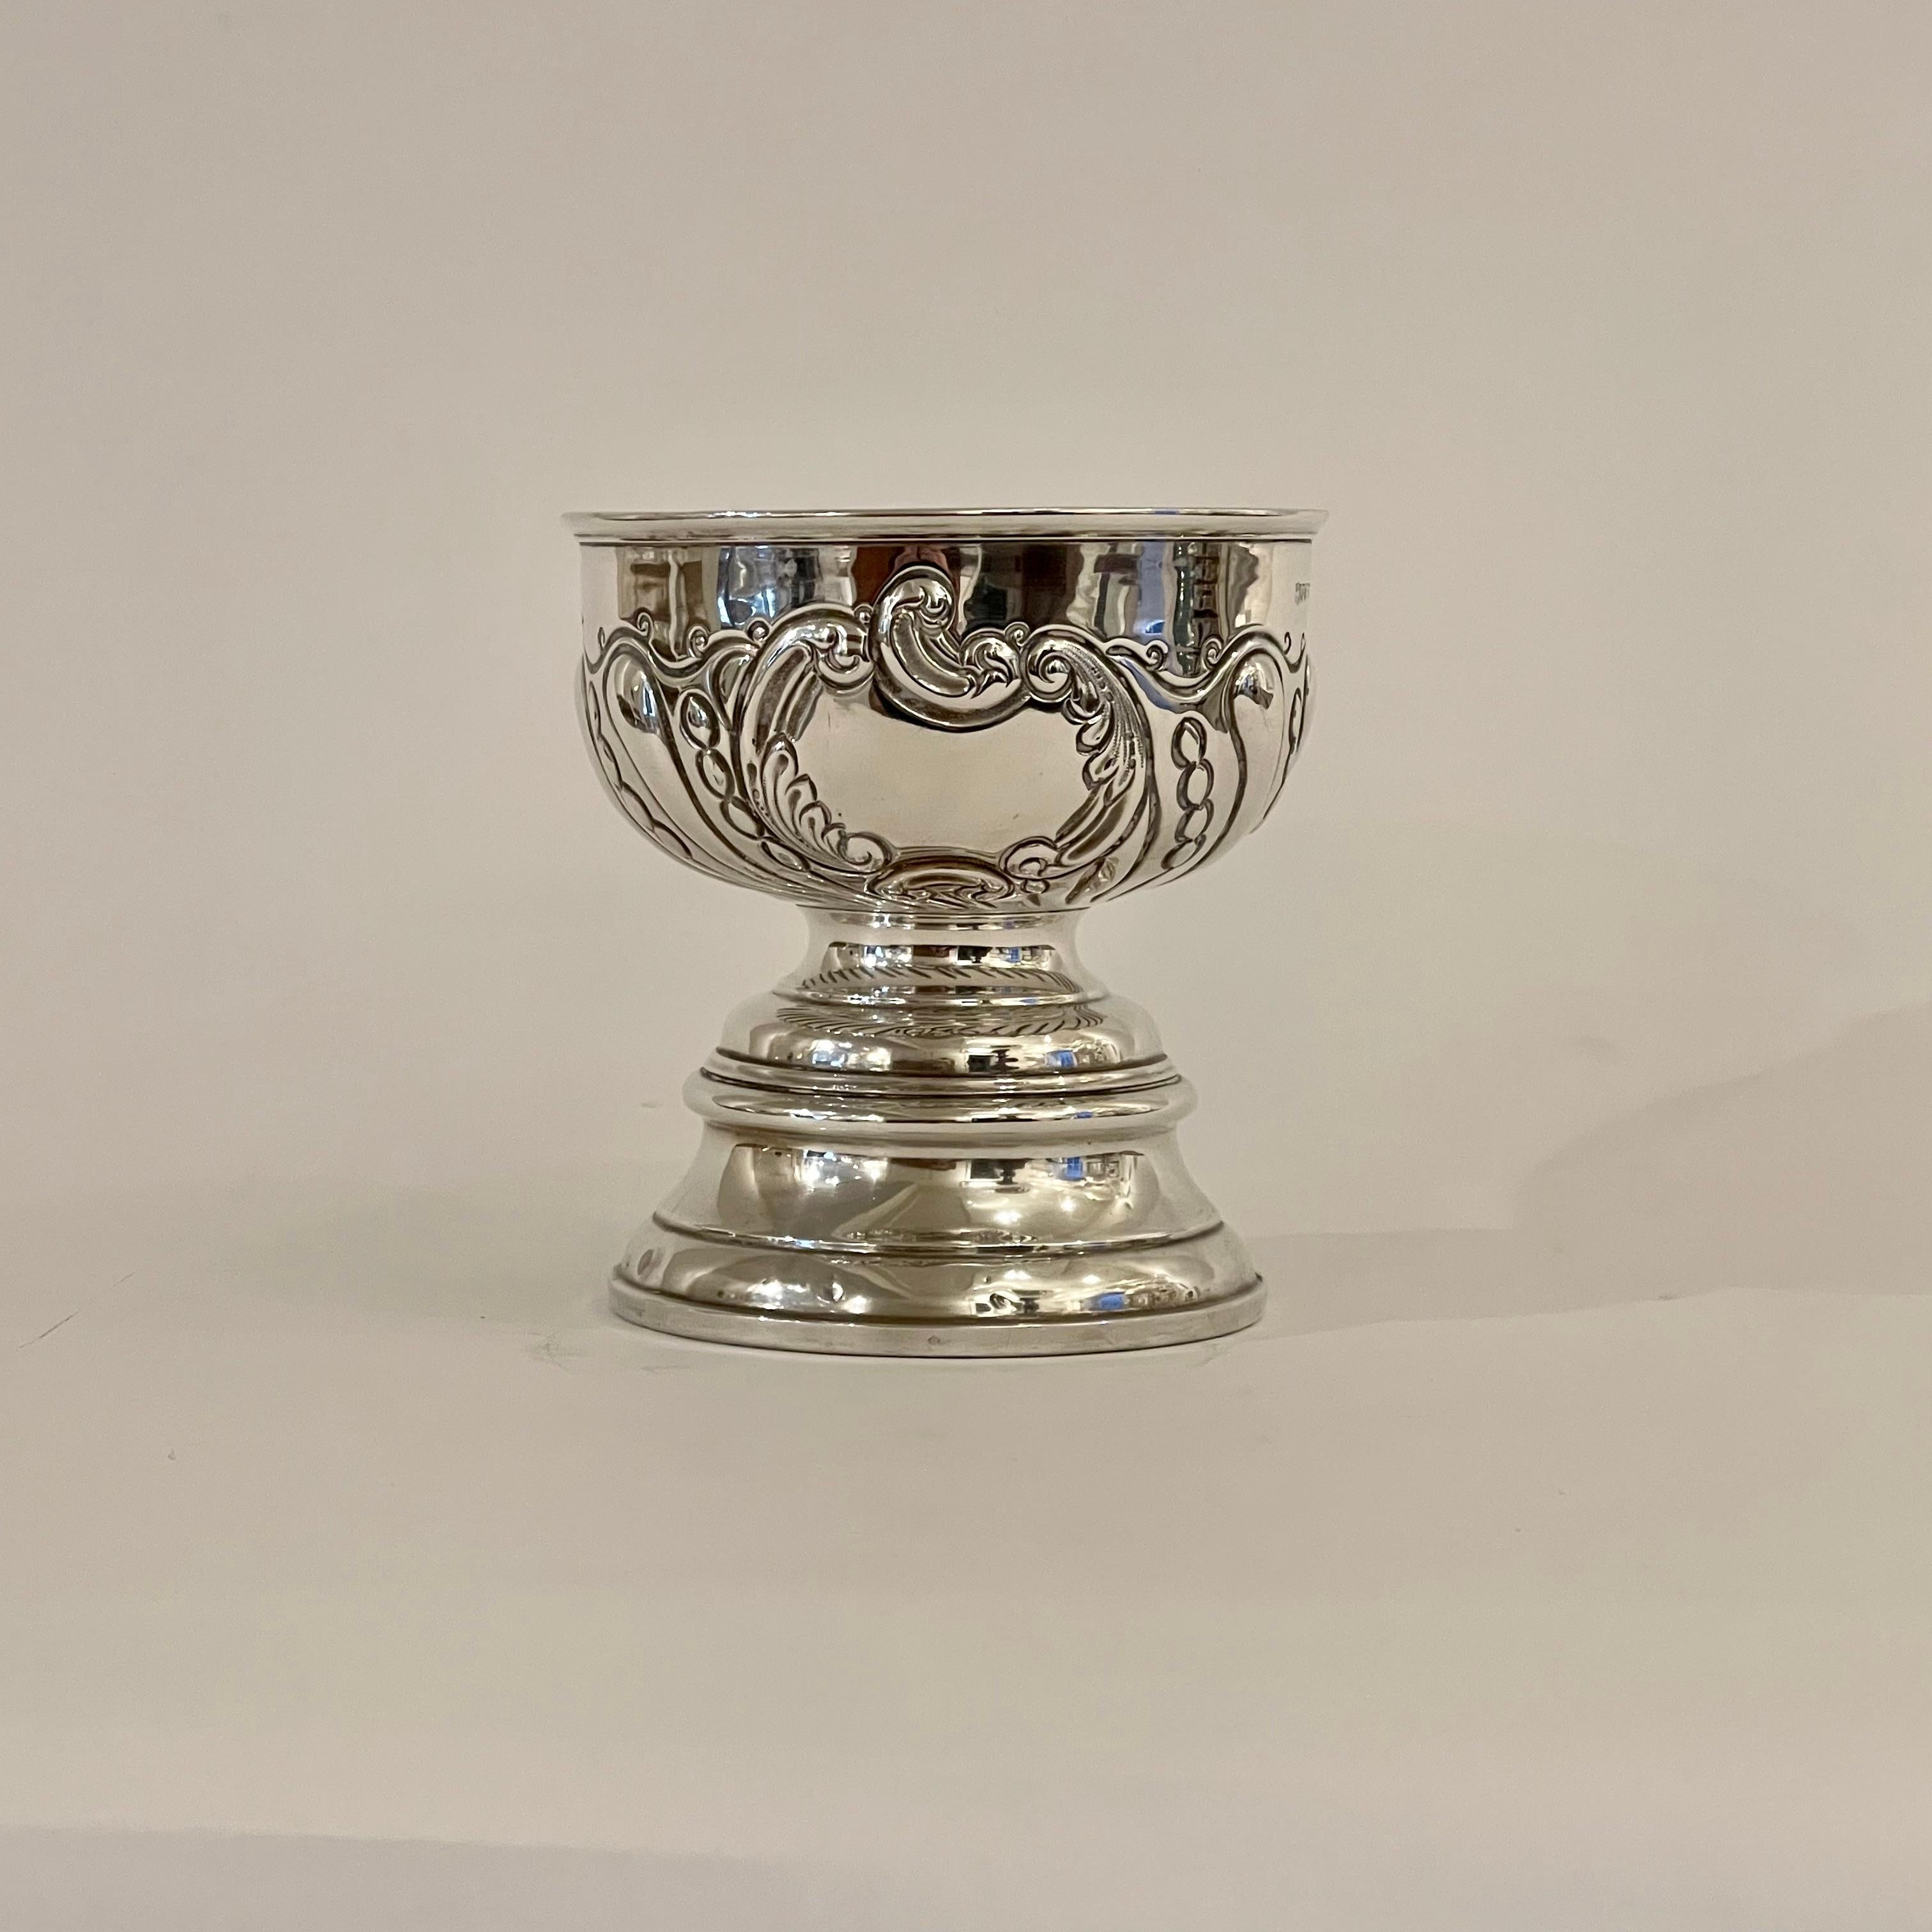 Made from solid Sterling Silver by Cooper Brothers & Sons of Sheffield in 1906, this Edwardian comport bowl is wonderfully decorated with organic Art Nouveau forms. With a wide pedestal base giving the piece a ‘Tazza’ style, the bowl is embossed